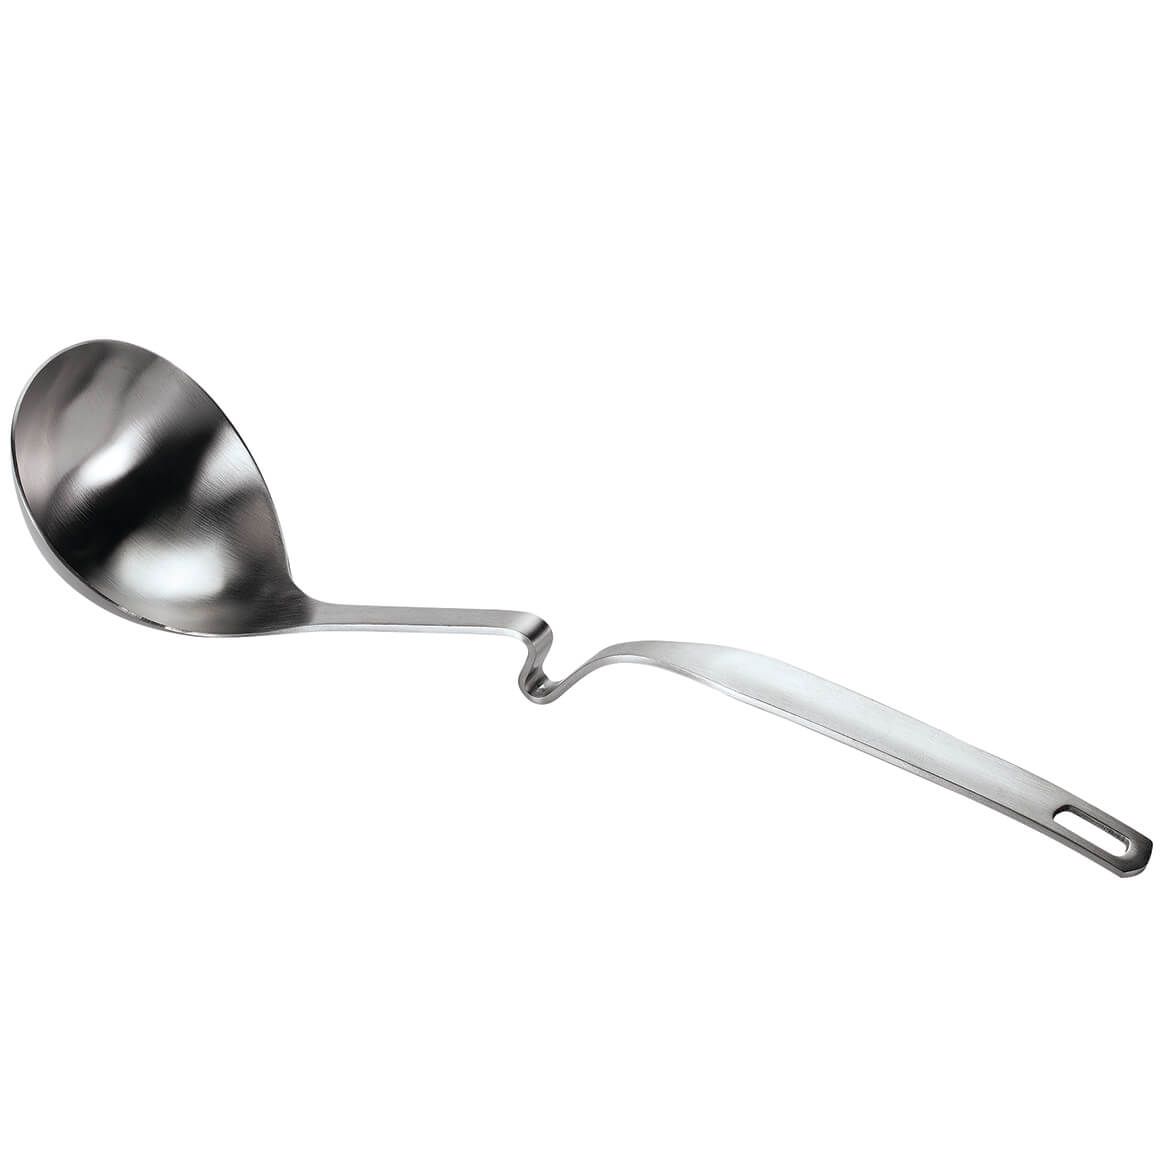 Stainless Steel Soup Ladle with Rim Rest + '-' + 372010